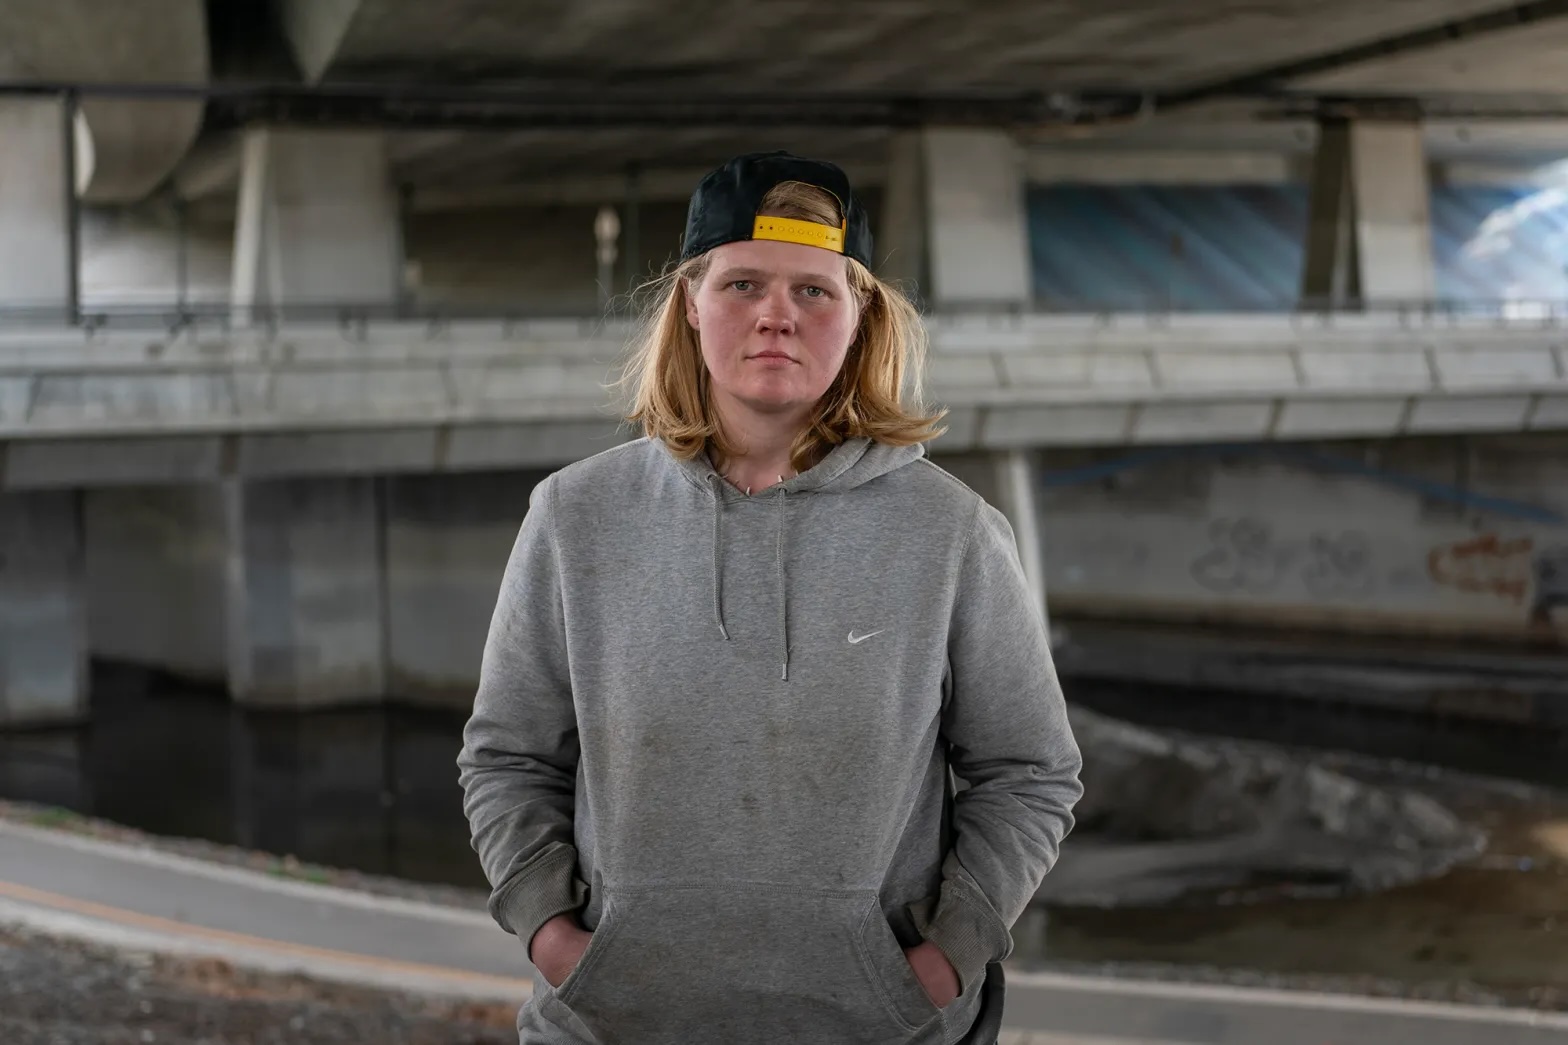 A young white girl with baseball cap worn backward and neck-length blond hair and blue eyes wearing a grey hoodie looks straight in the camera underneath an overpass.